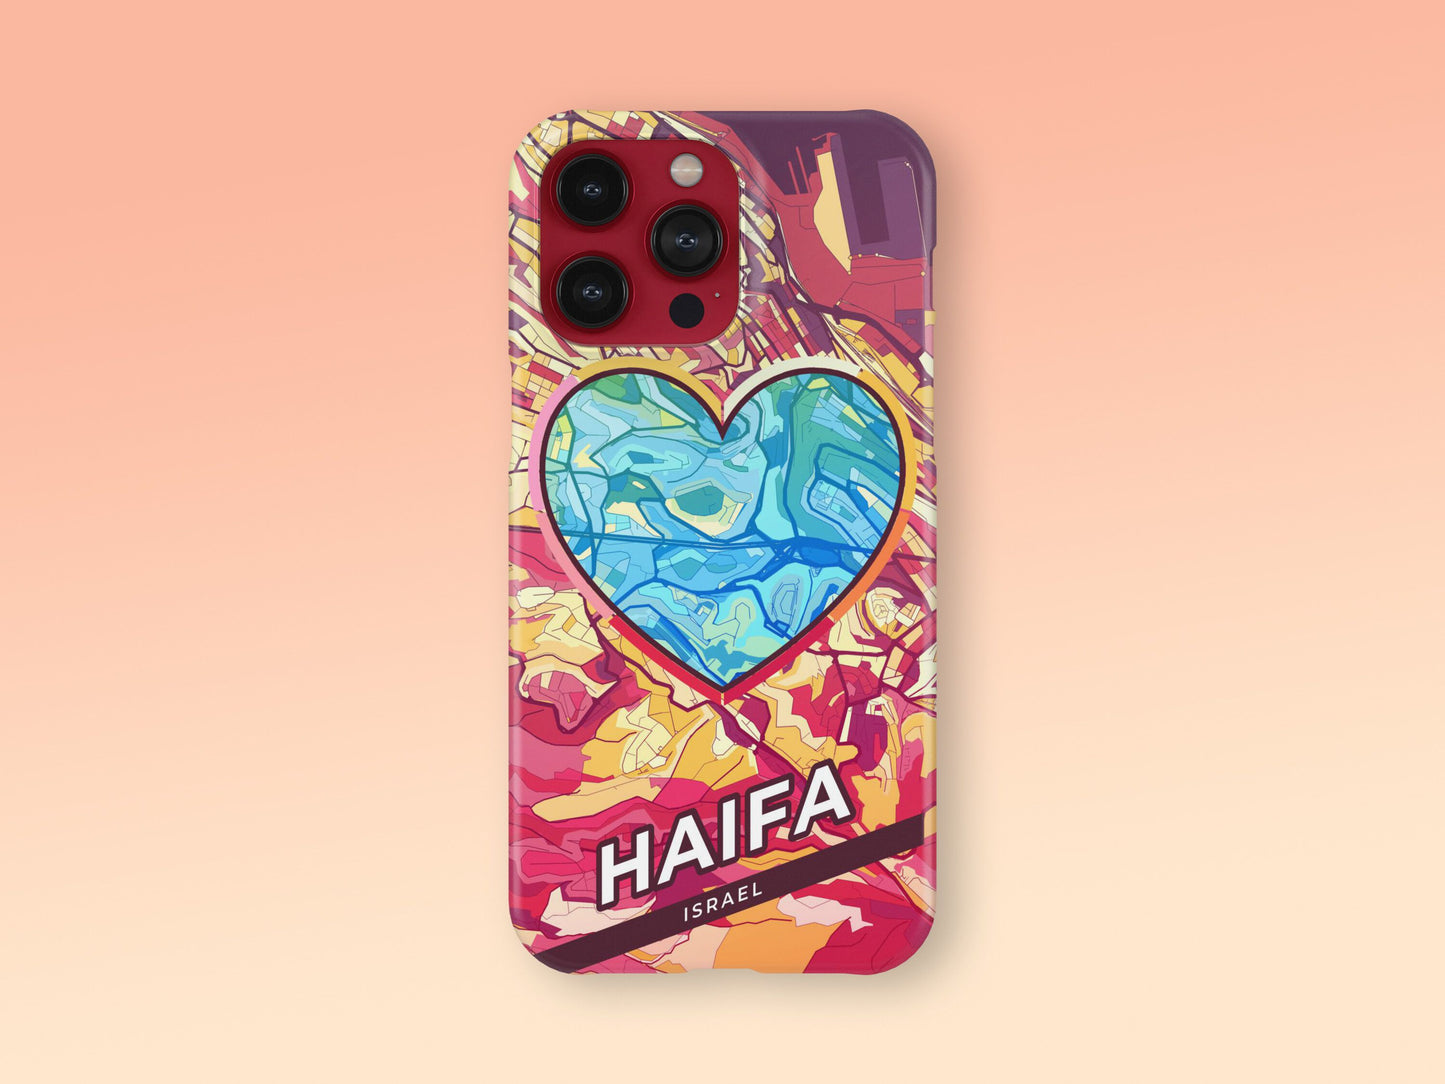 Haifa Israel slim phone case with colorful icon. Birthday, wedding or housewarming gift. Couple match cases. 2